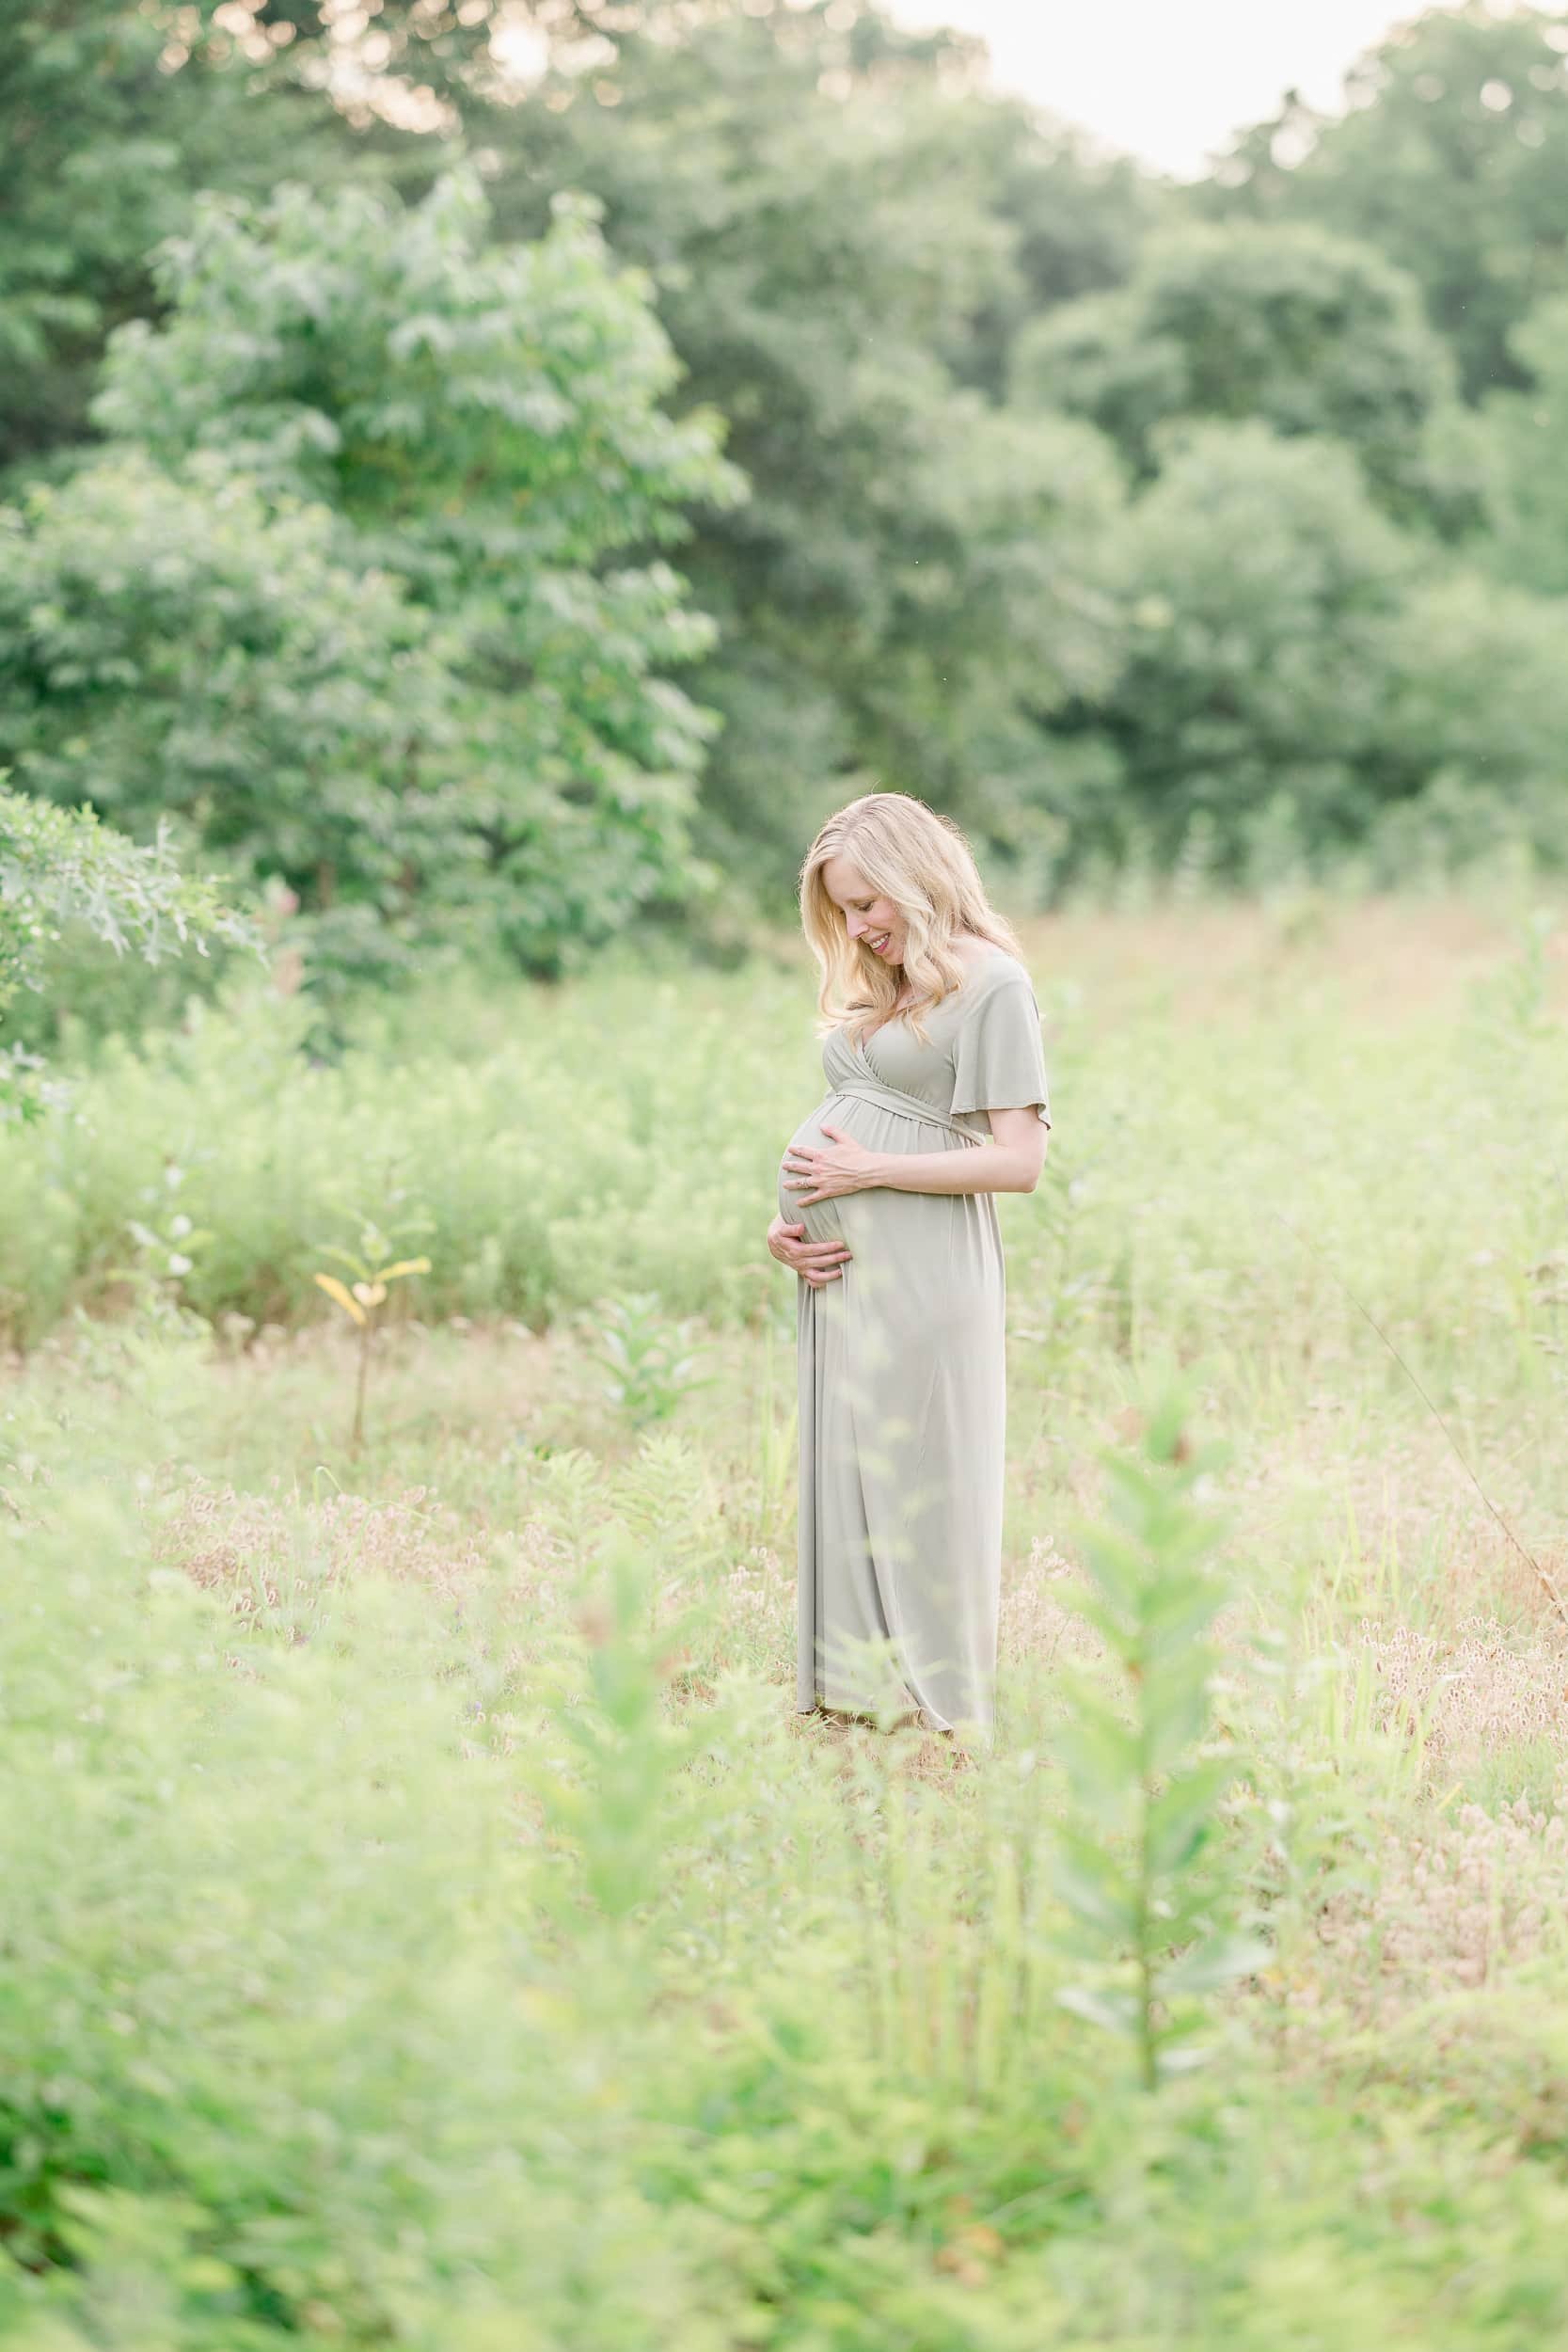 A pregnant woman wearing a green dress poses in a field during her summer maternity photoshoot.